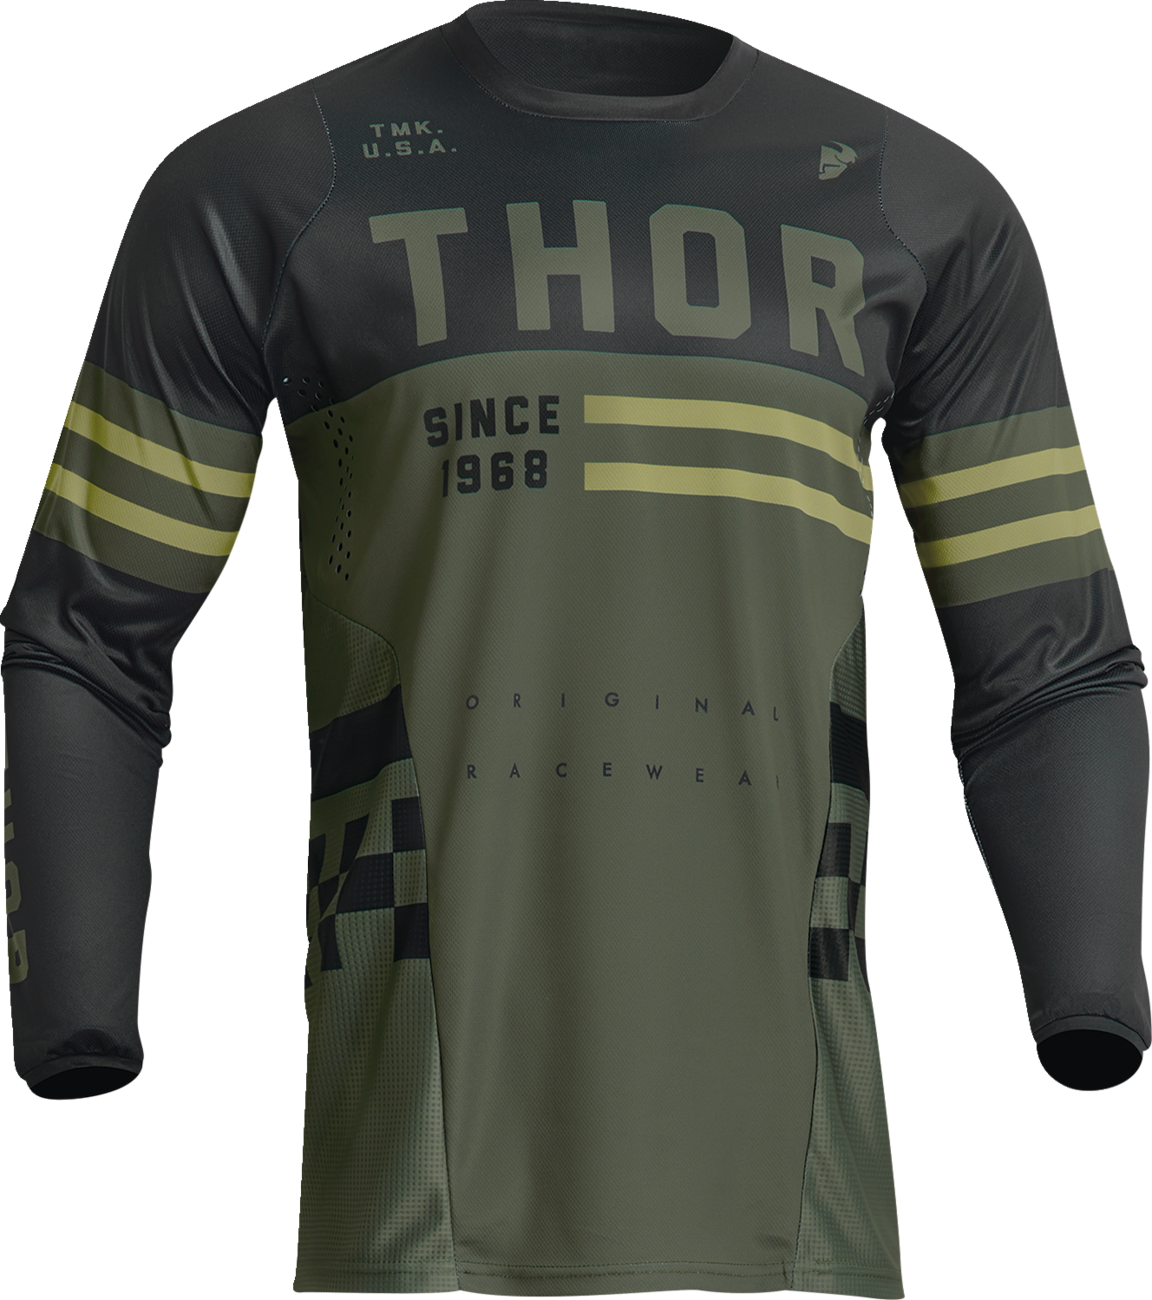 THOR Youth Pulse Combat Jersey - Army - 2XS 2912-2179